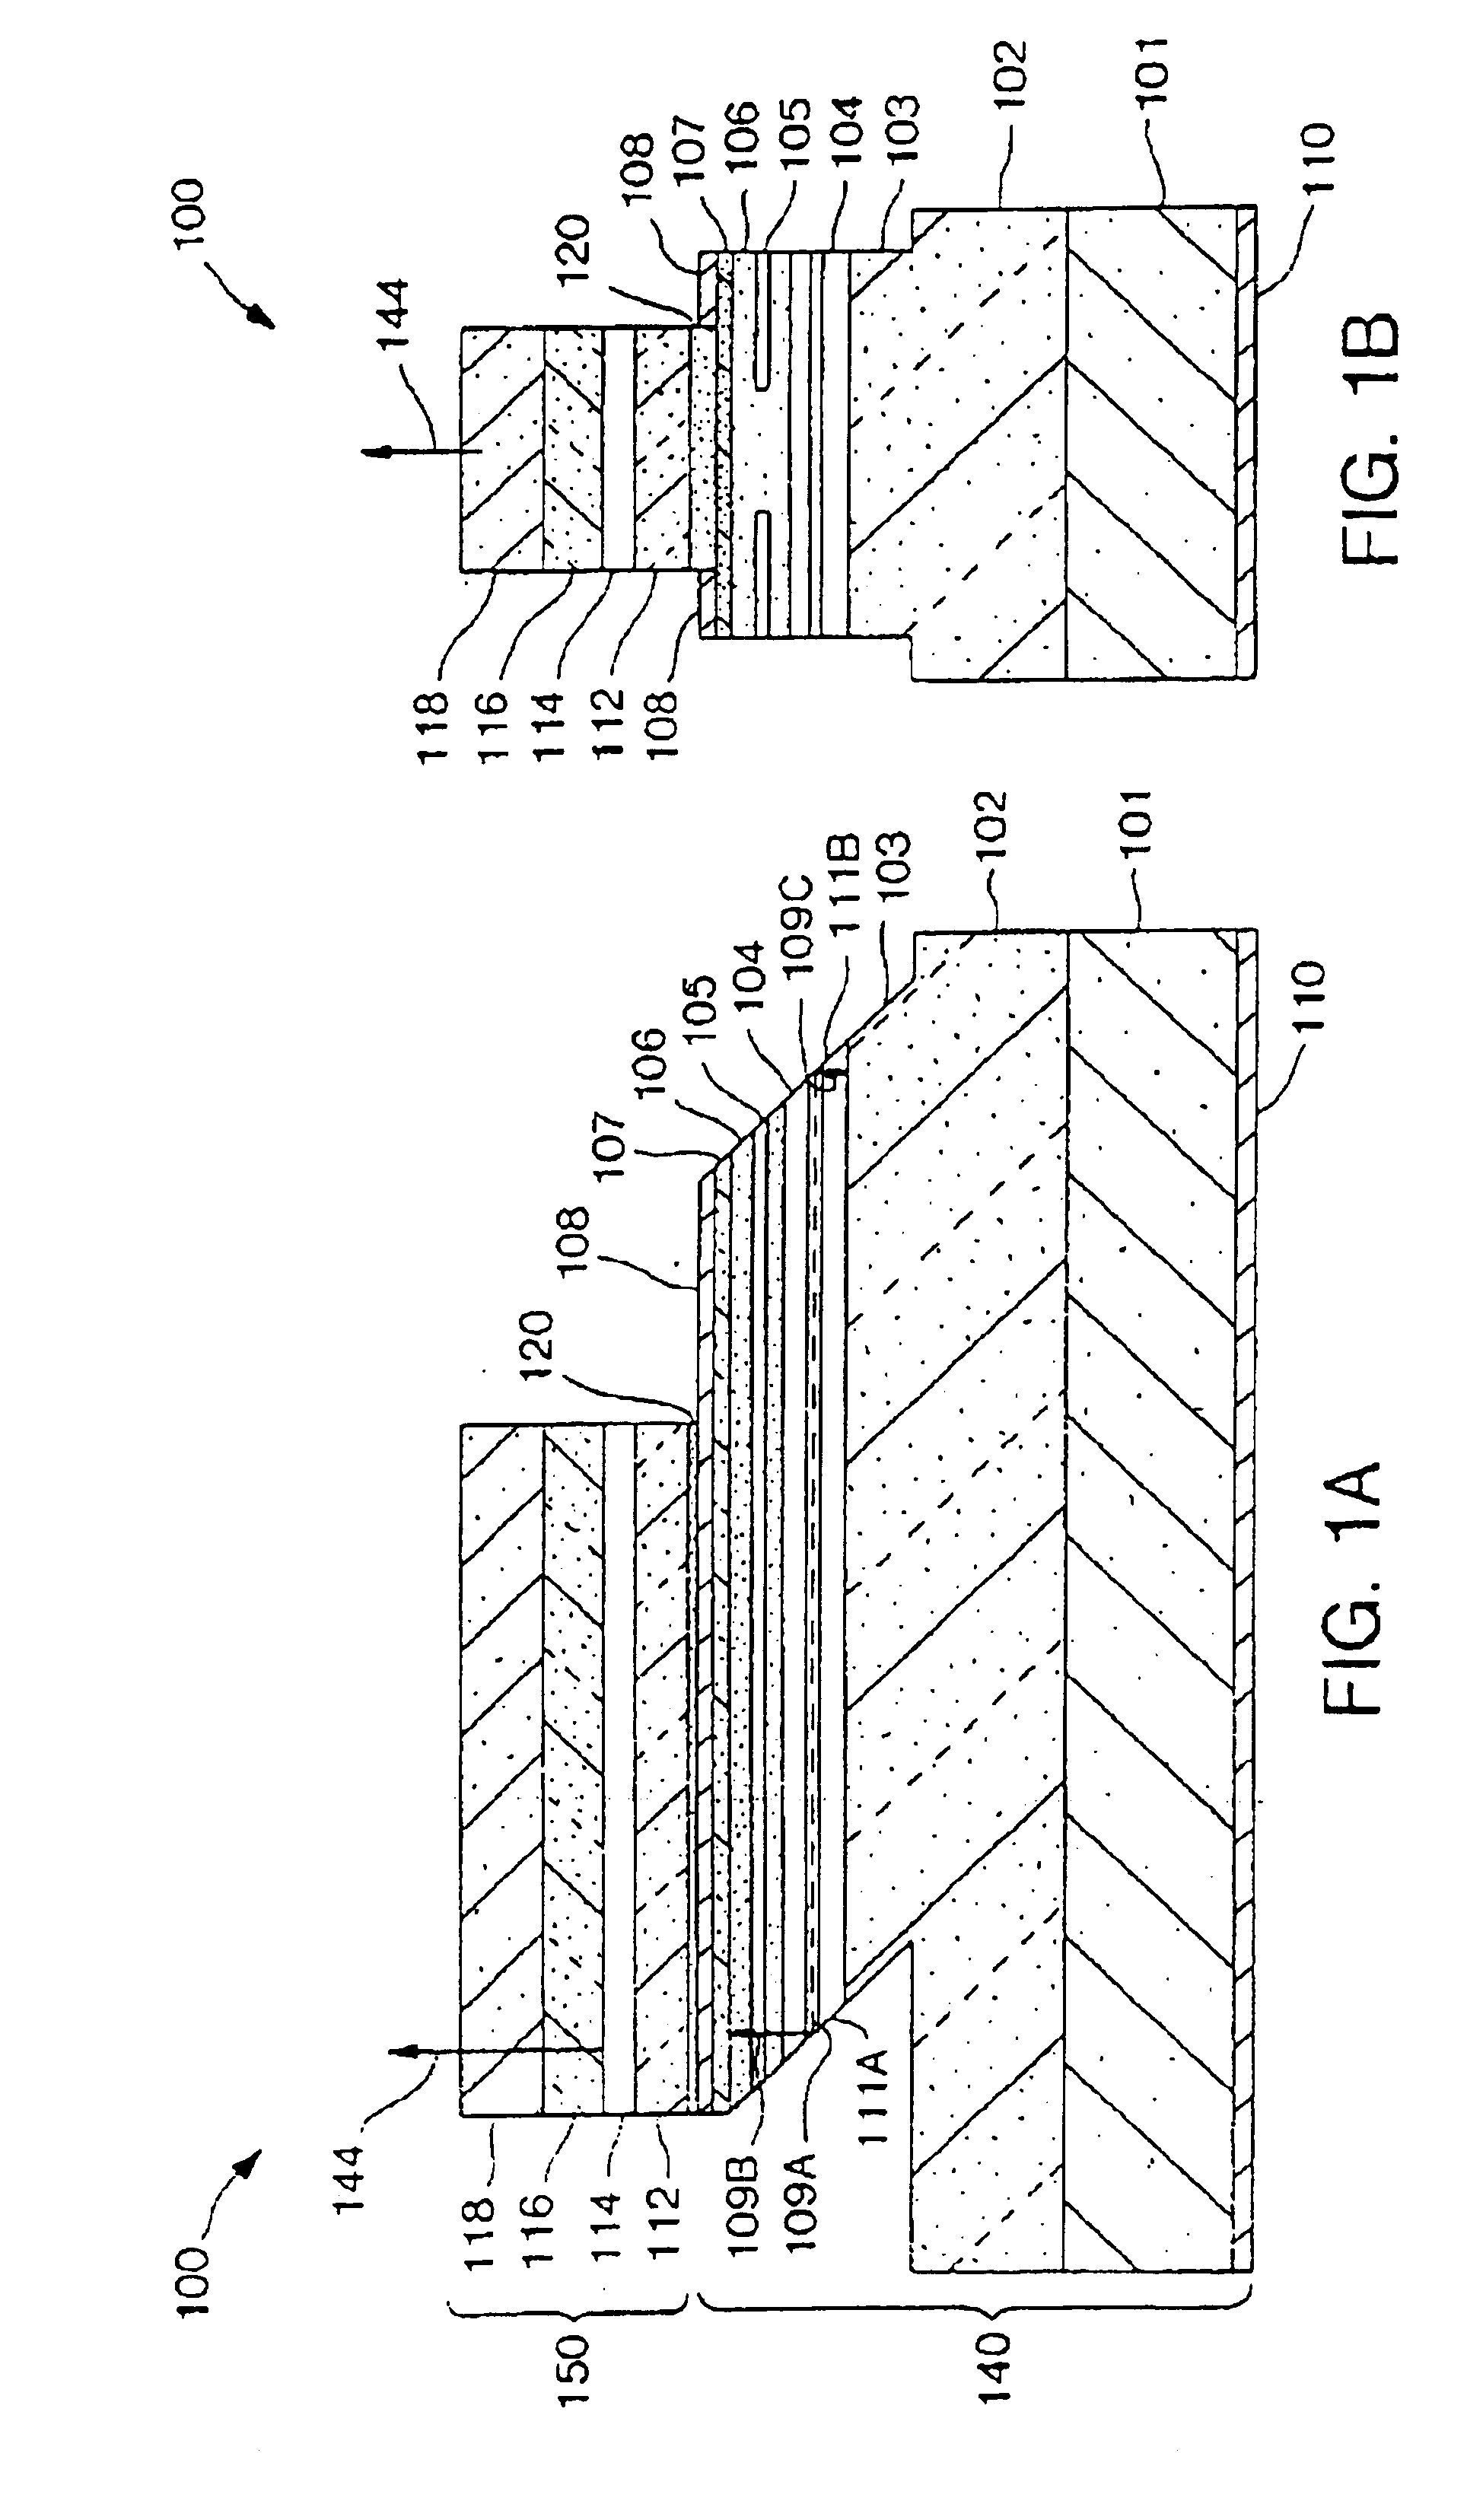 Systems, methods, and apparatuses for optically pumped vertical cavity surface emitting laser devices